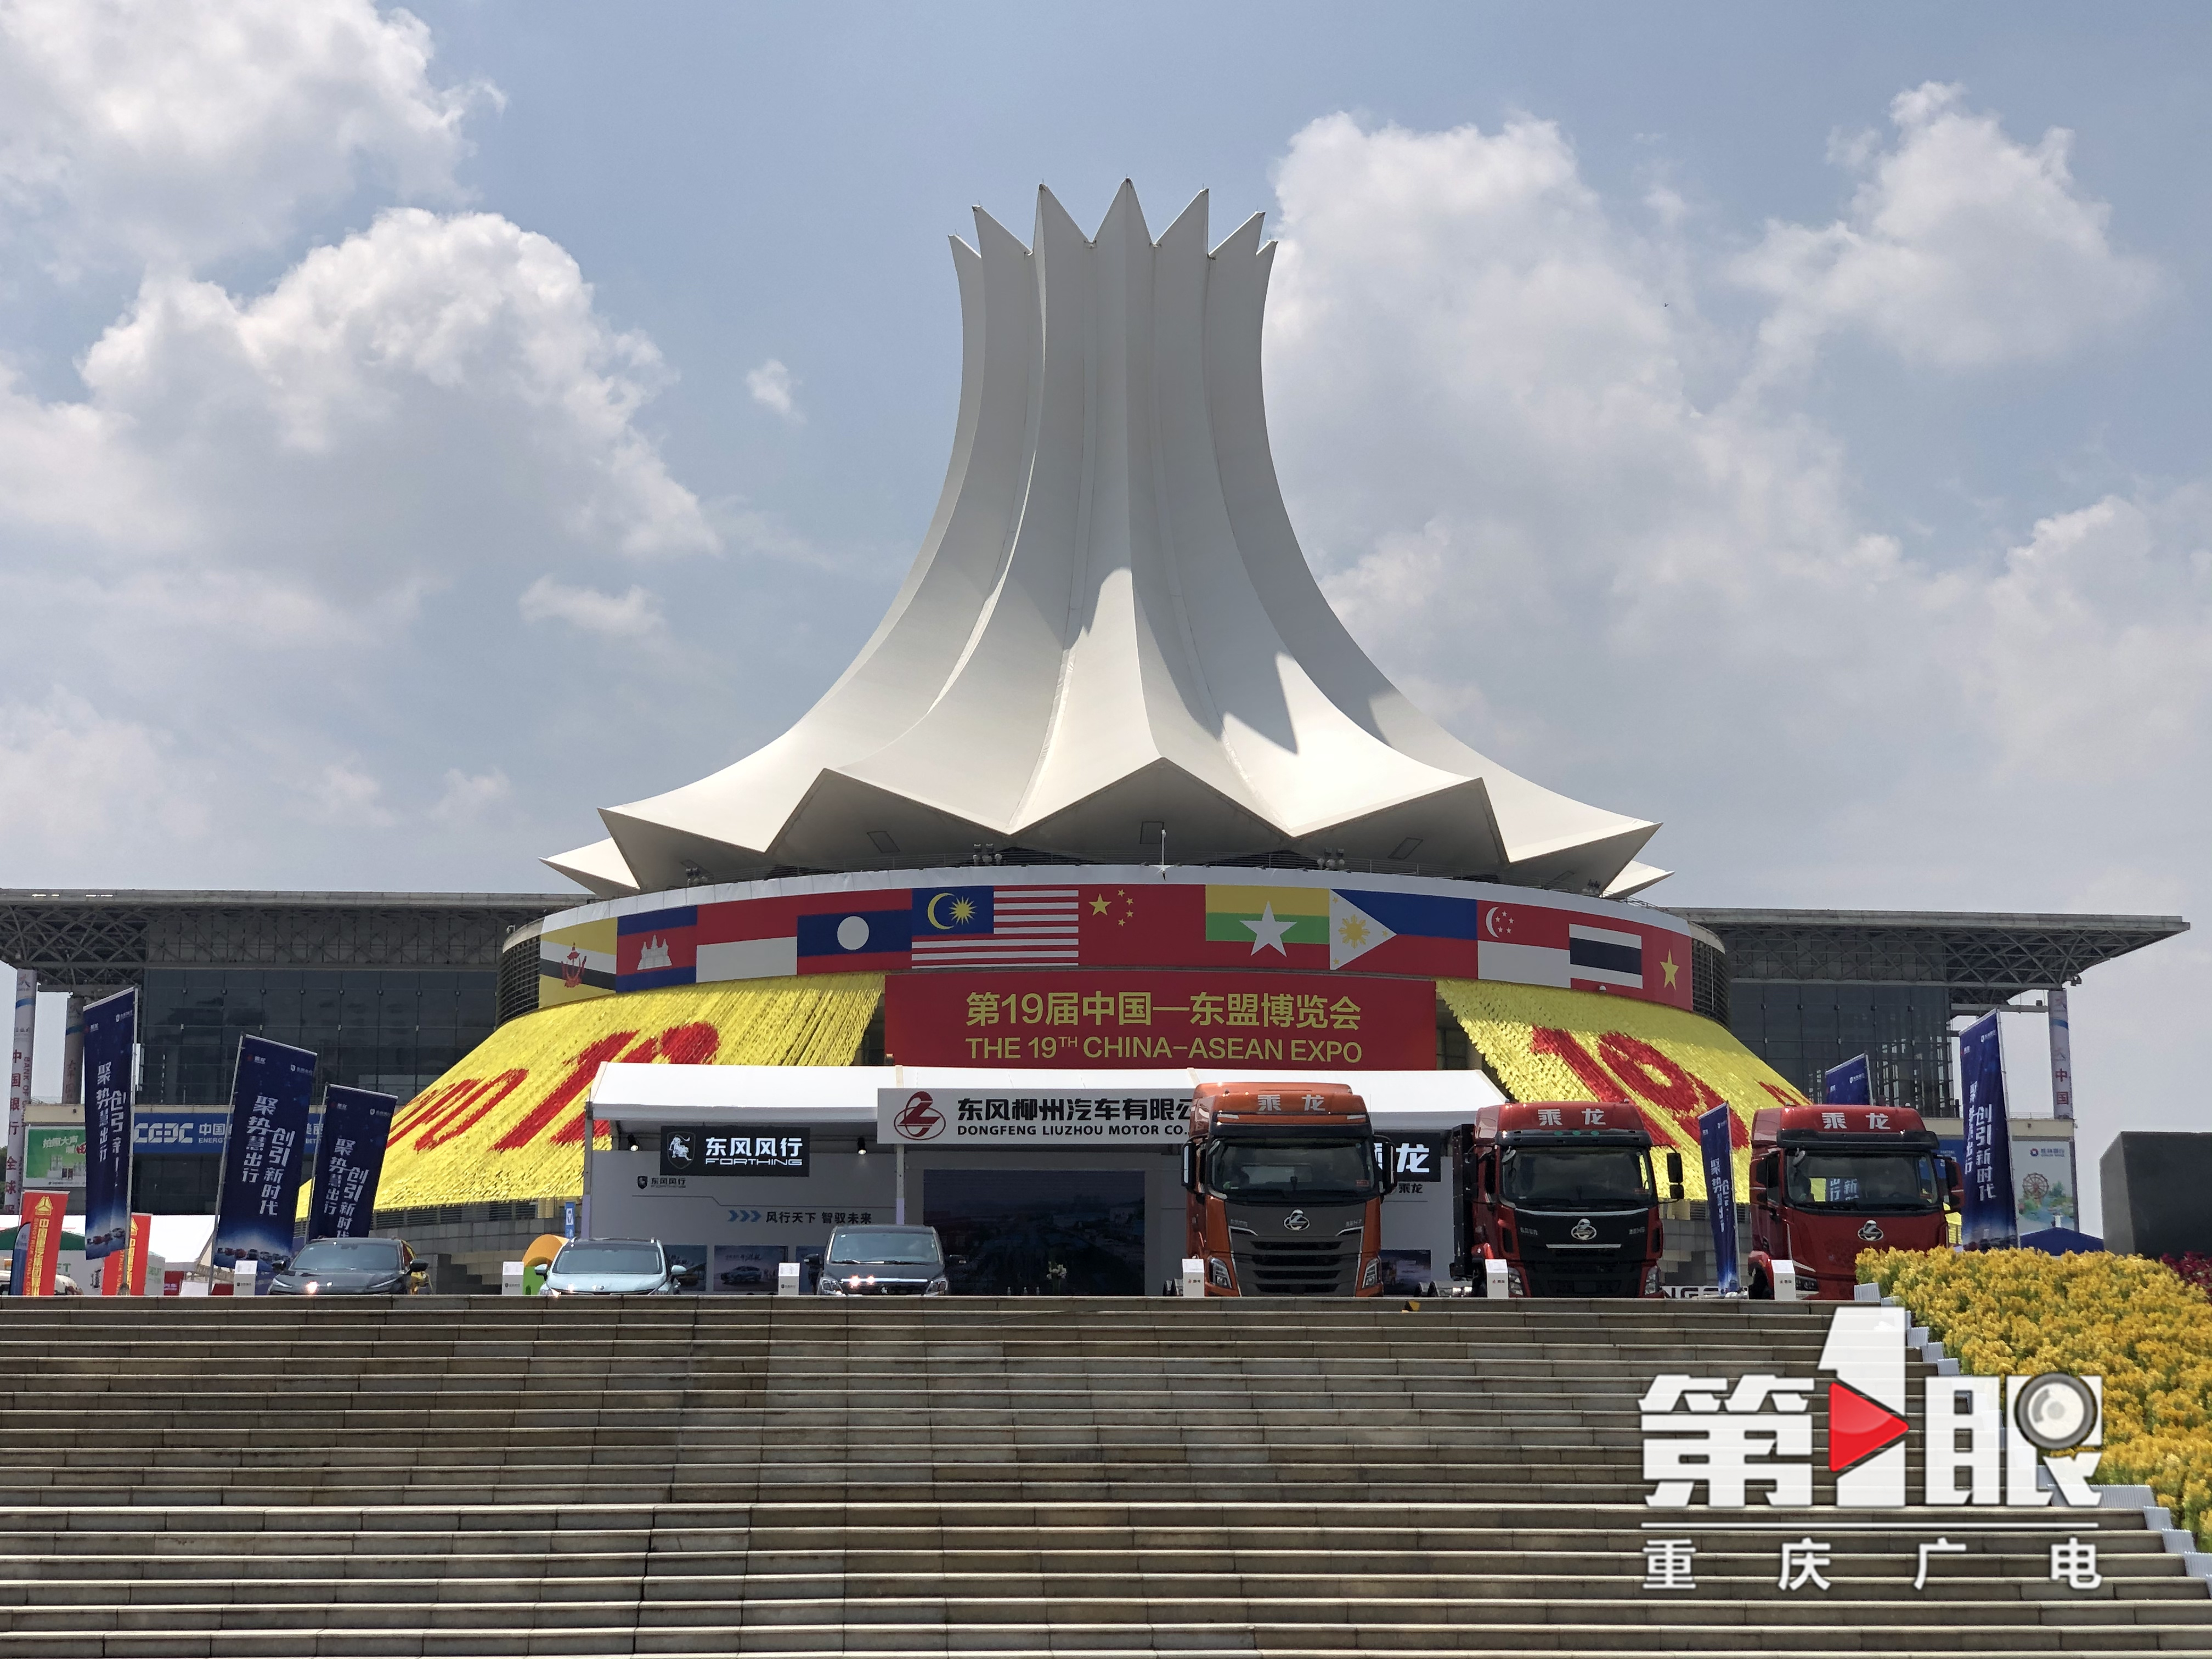 Fantong Attended The 19th China-ASEAN EXPO